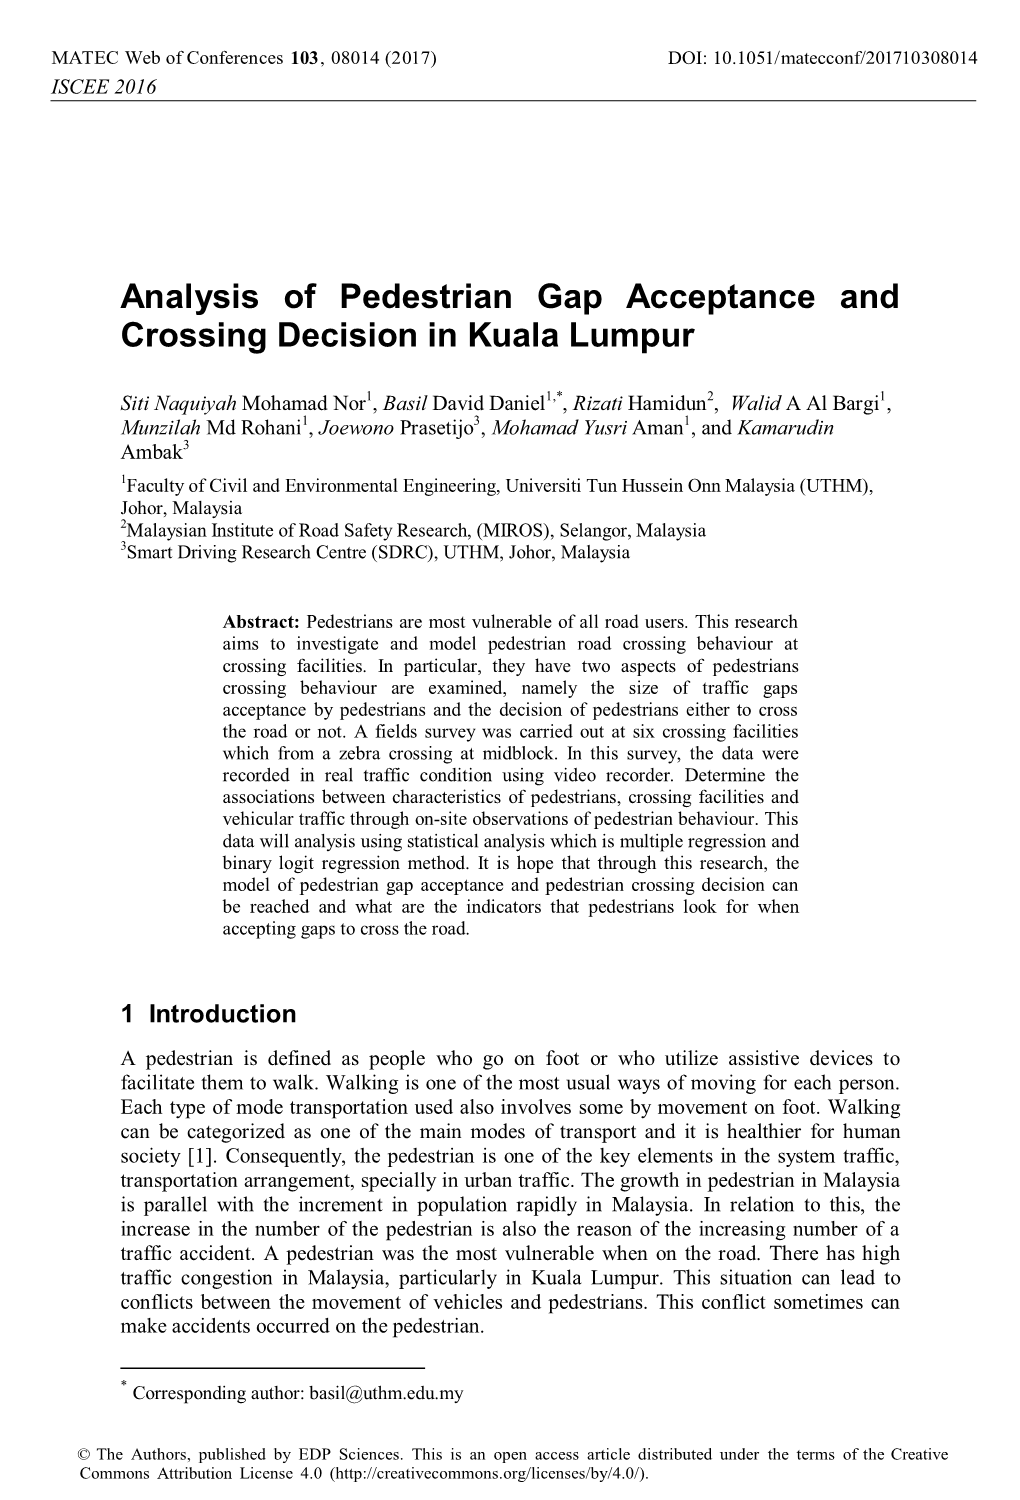 Analysis of Pedestrian Gap Acceptance and Crossing Decision in Kuala Lumpur